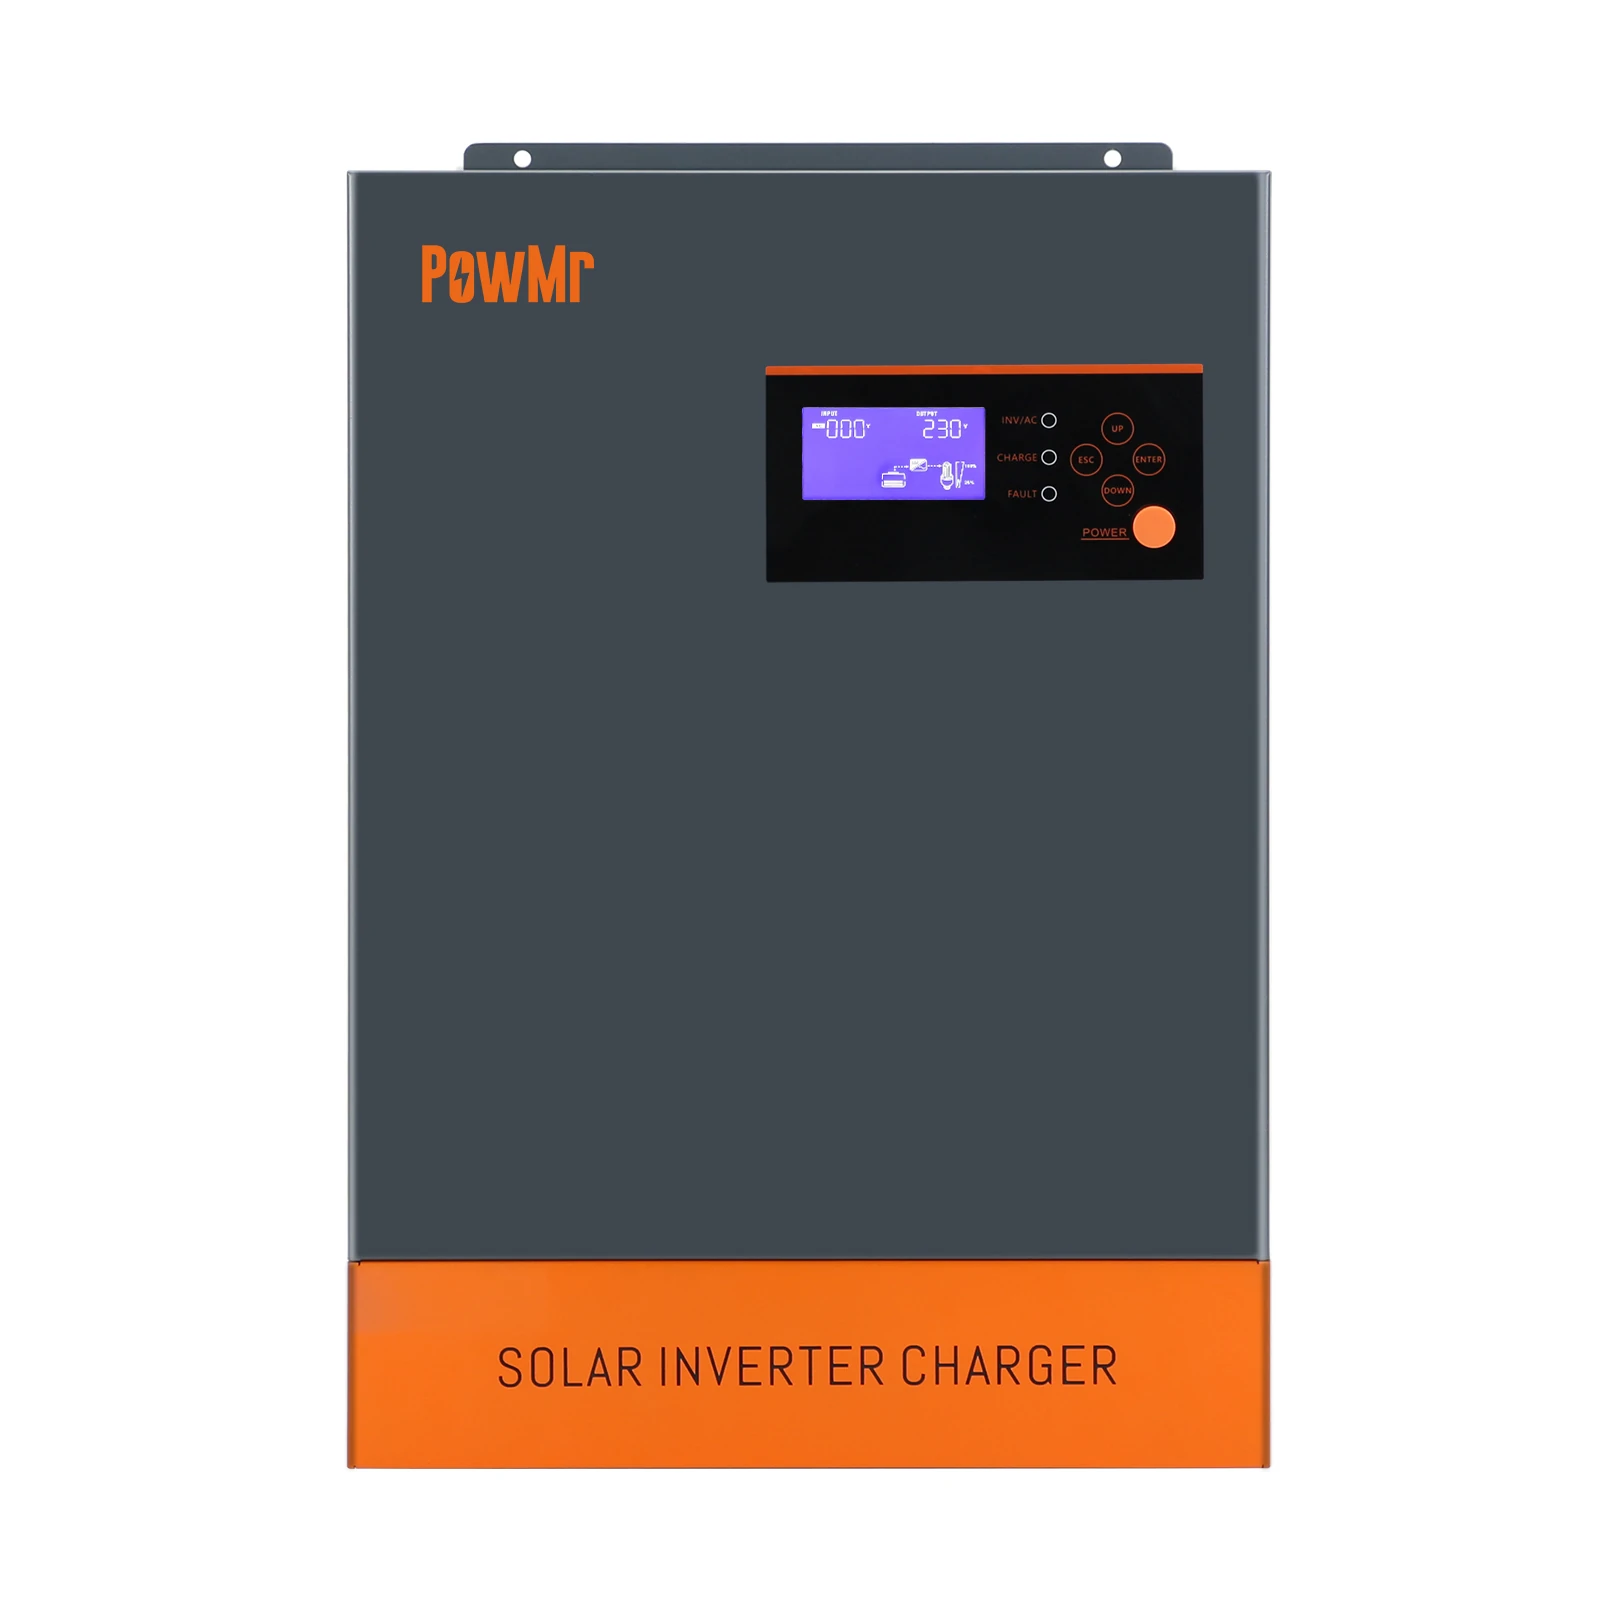 Find PowMr 3pcs 16 5KW 220Vac/380Vac DC 48V Three Phase Solar Inverter With MPPT 80A Solar Controller PV 500V Can Work Without Battery POW HVM5 5K 48V P for Sale on Gipsybee.com